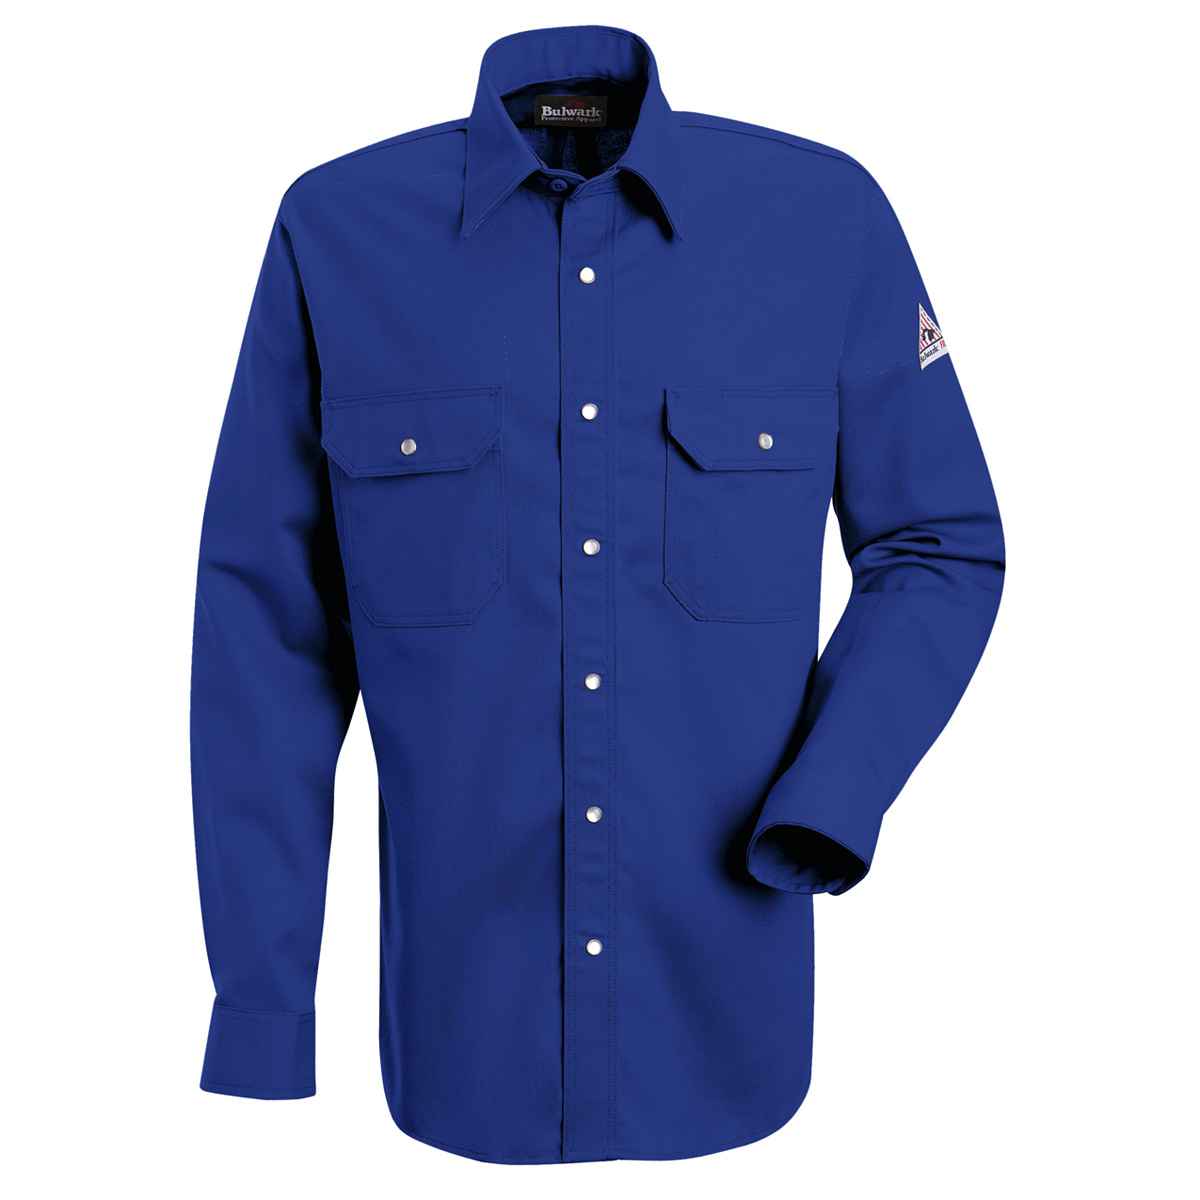 Bulwark® 2X Tall Royal Blue EXCEL FR® Cotton Flame Resistant Uniform Shirt With Snap Front Closure